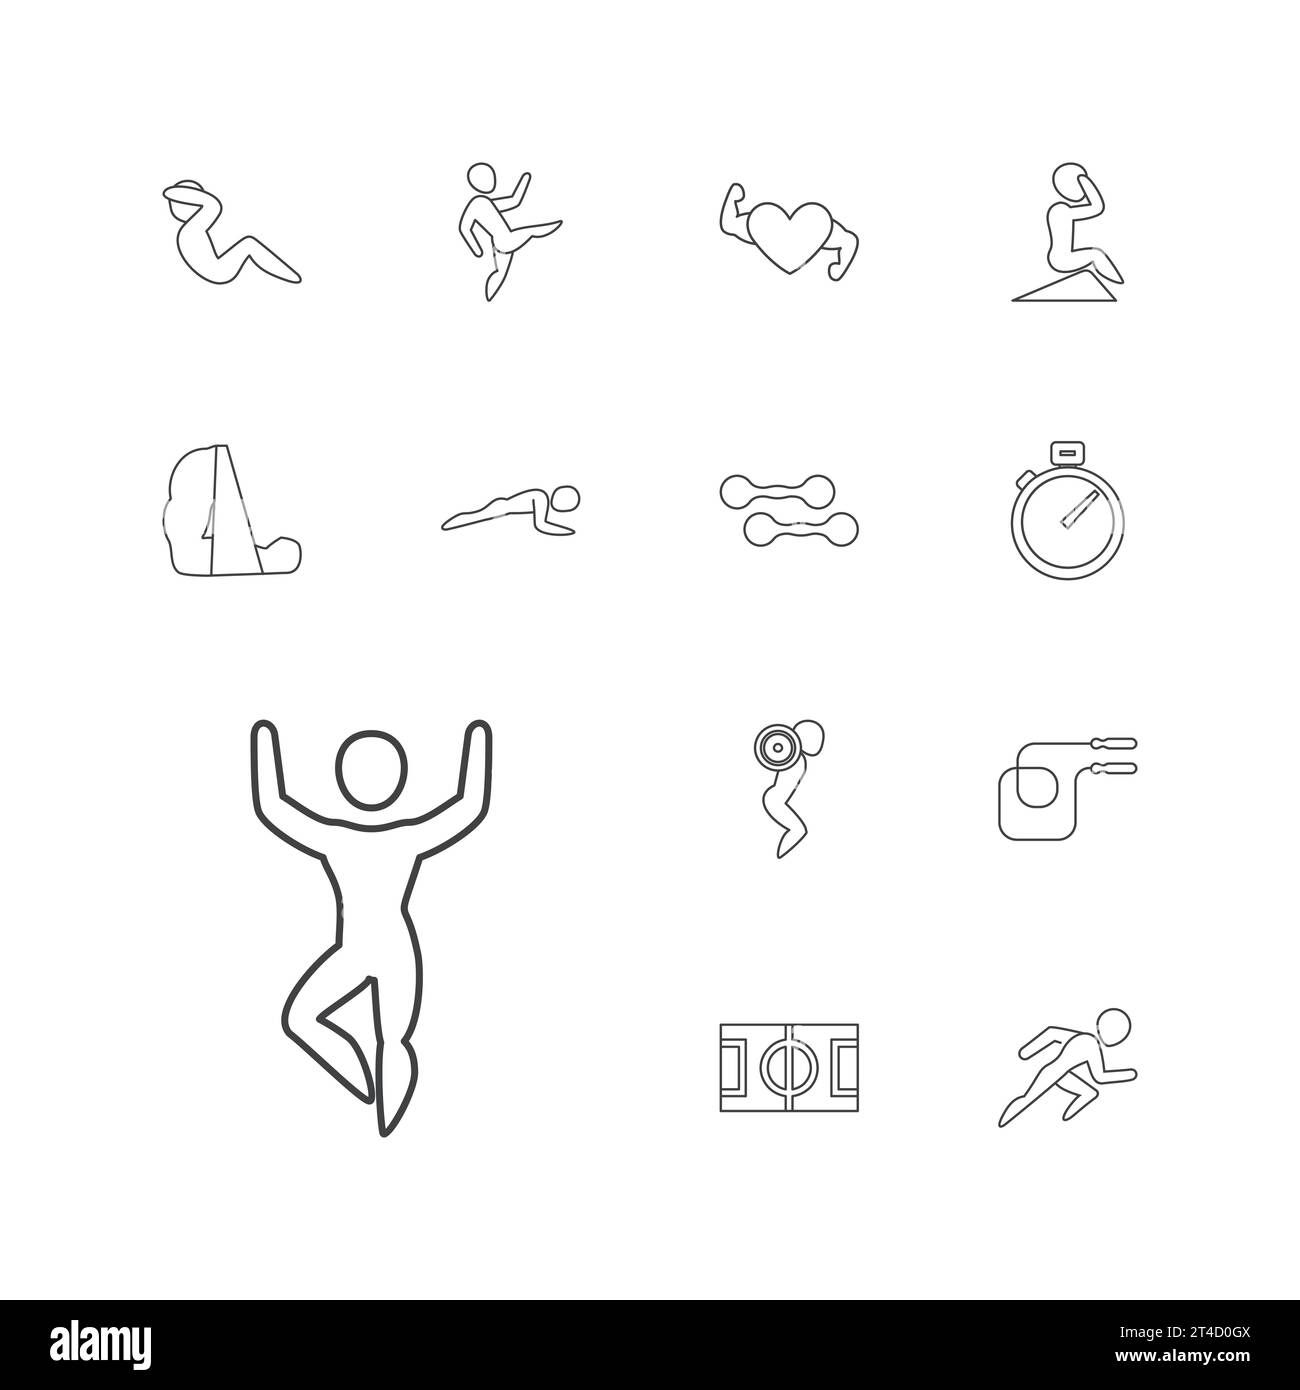 Sports and training icons Royalty Free Vector Image